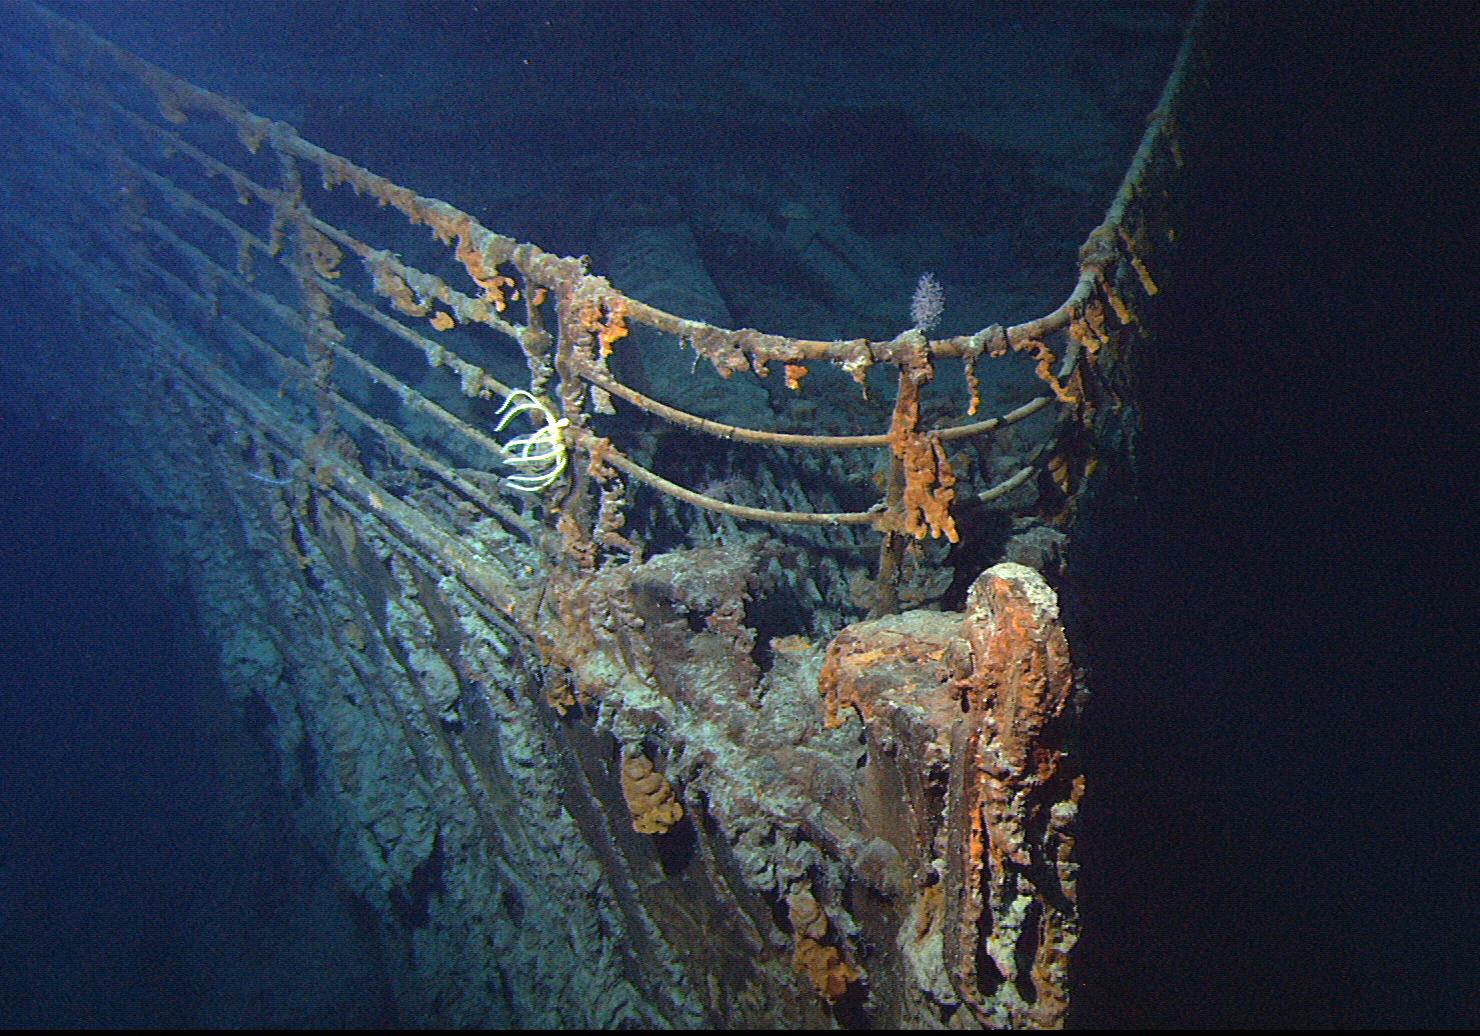 The bow of the Titanic, photographed on a return voyage in 2004.